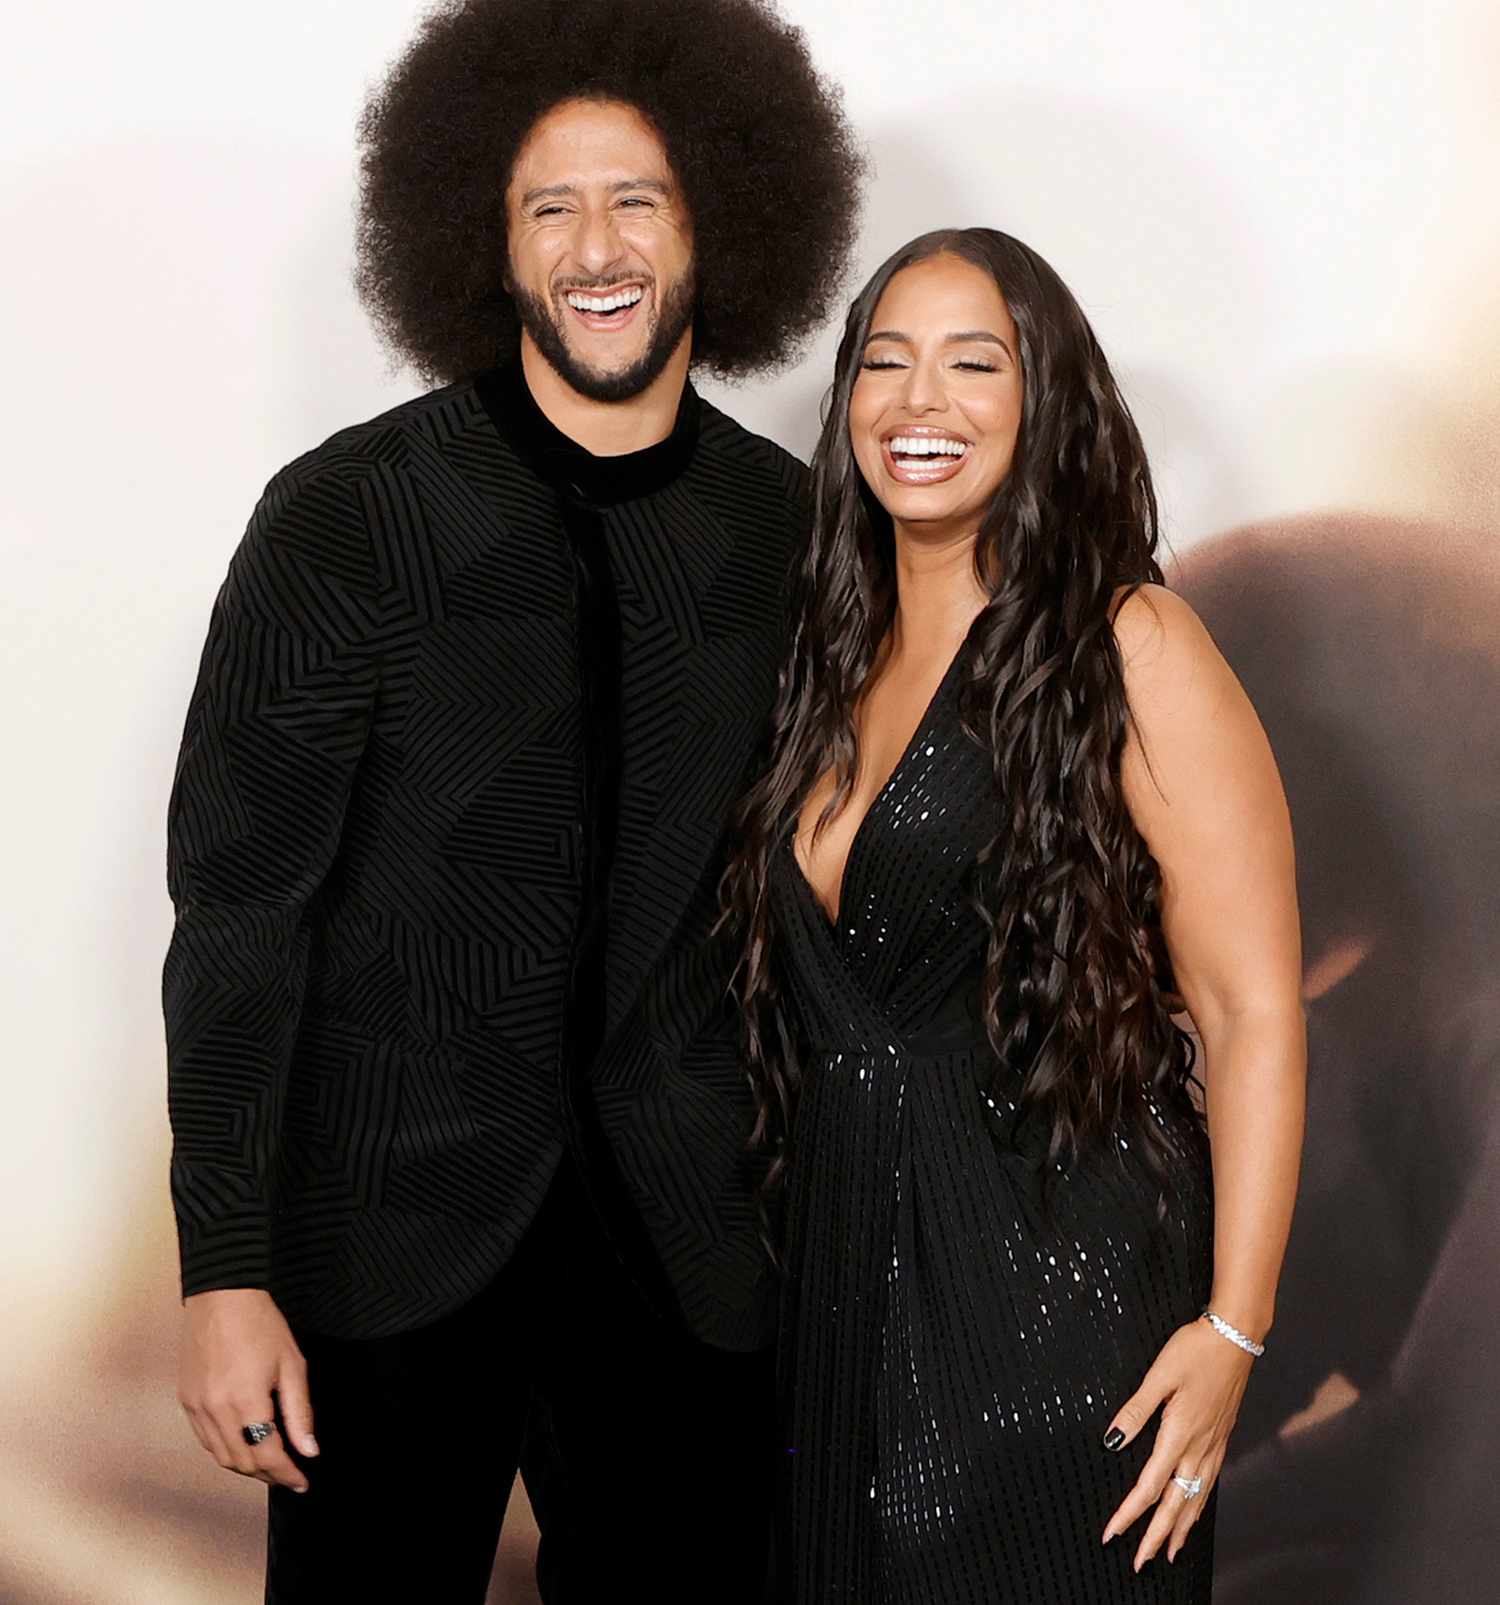 Colin Kaepernick and Nessa Diab attend the Premiere of Netflix's "Colin In Black And White" at Academy Museum of Motion Pictures on October 28, 2021 in Los Angeles, California